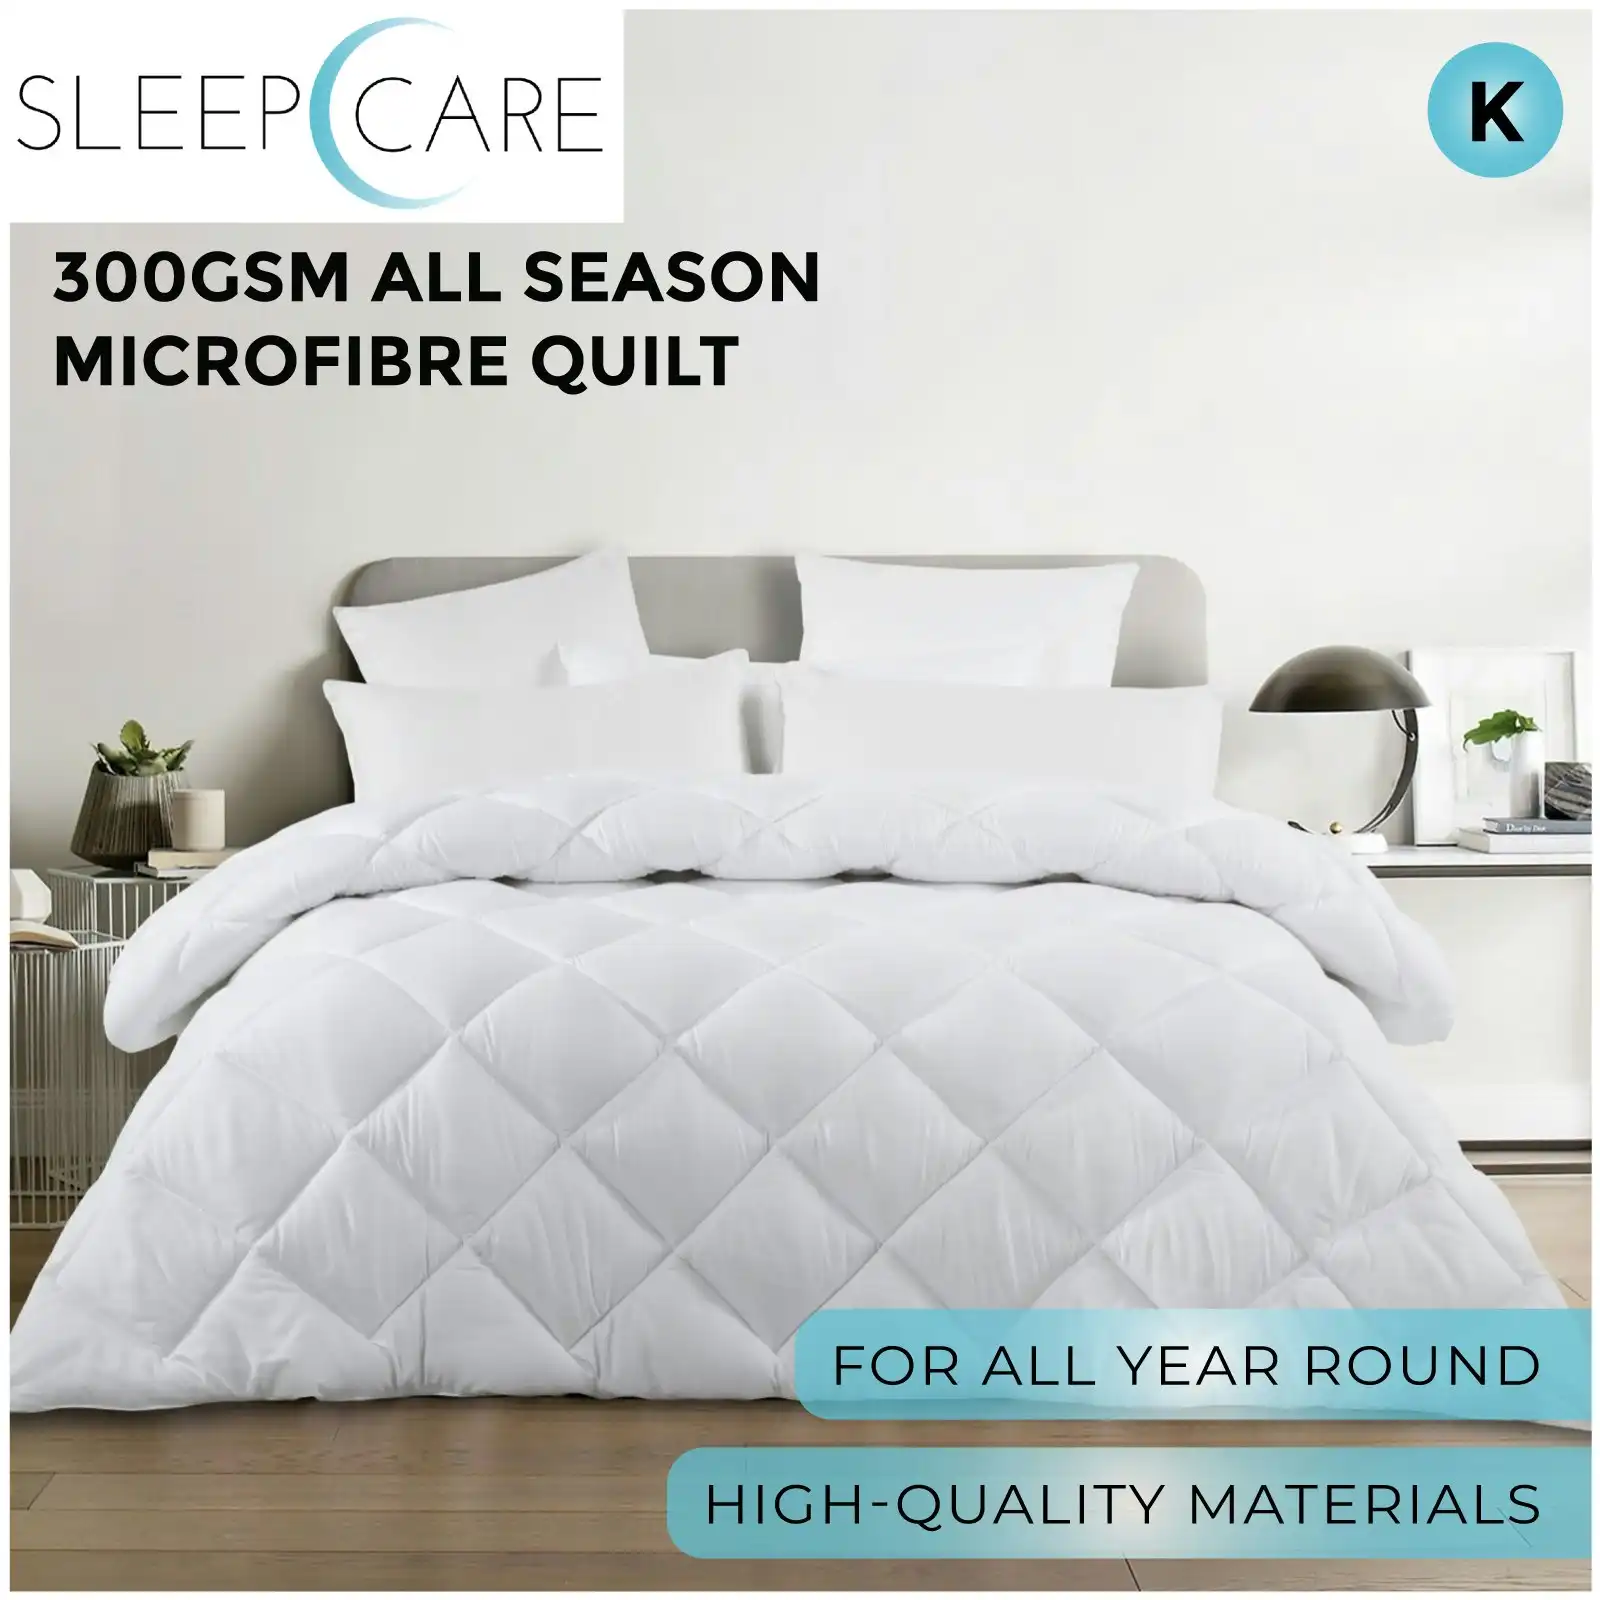 Sleepcare 300GSM All Season Microfibre Quilt King Bed